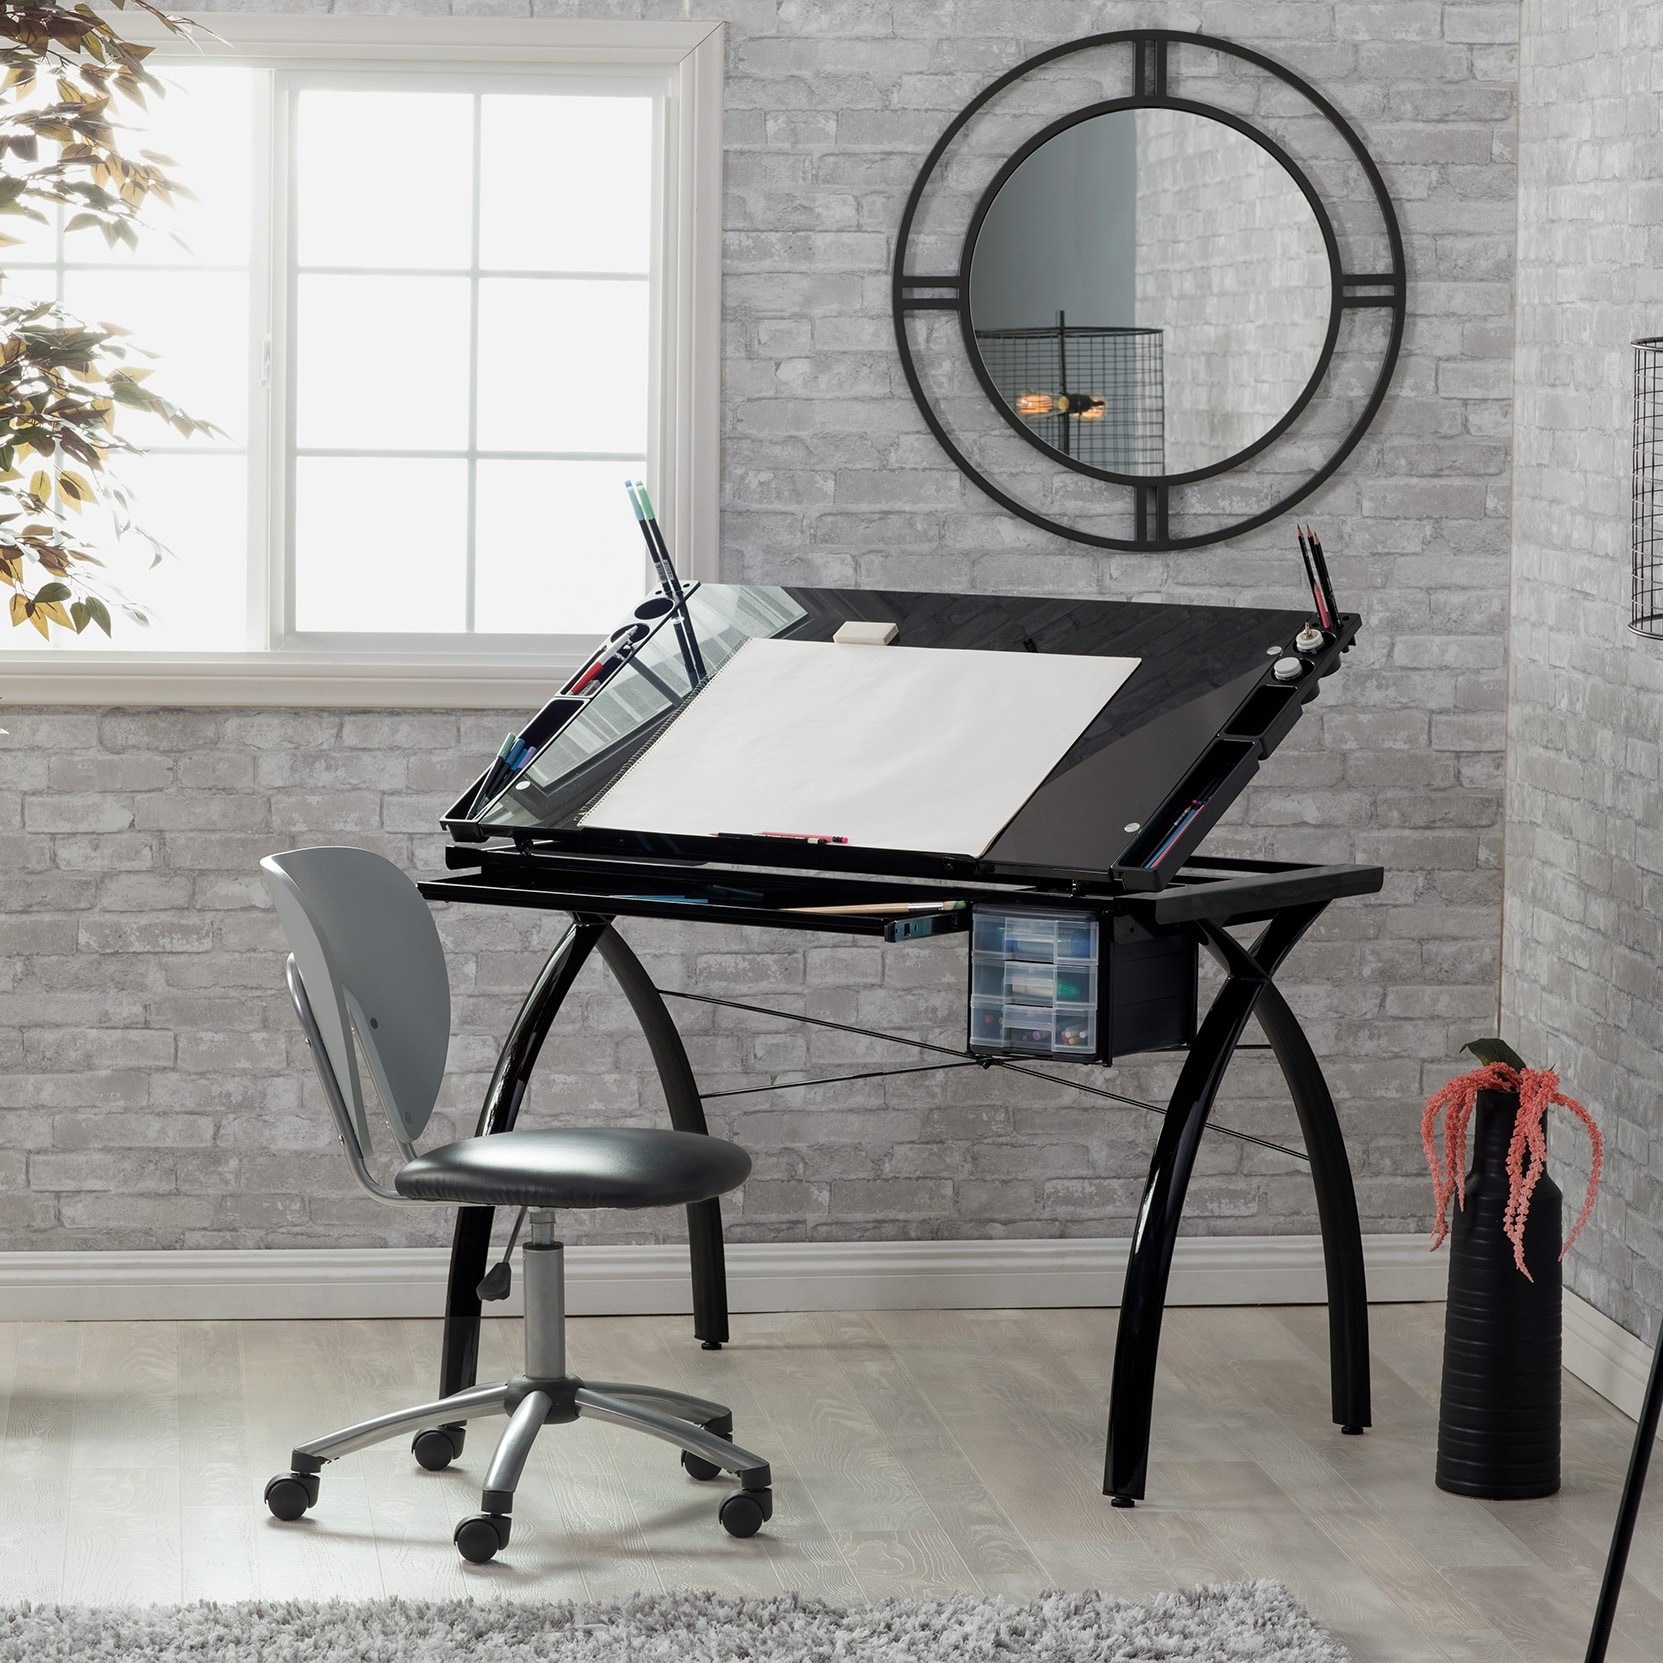 https://ak1.ostkcdn.com/images/products/is/images/direct/13e3b4796a58ef96cbecf73ae4a29e504a980ca3/Studio-Designs-Futura-Black-Glass-Top-Drafting-Table-with-Storage.jpg